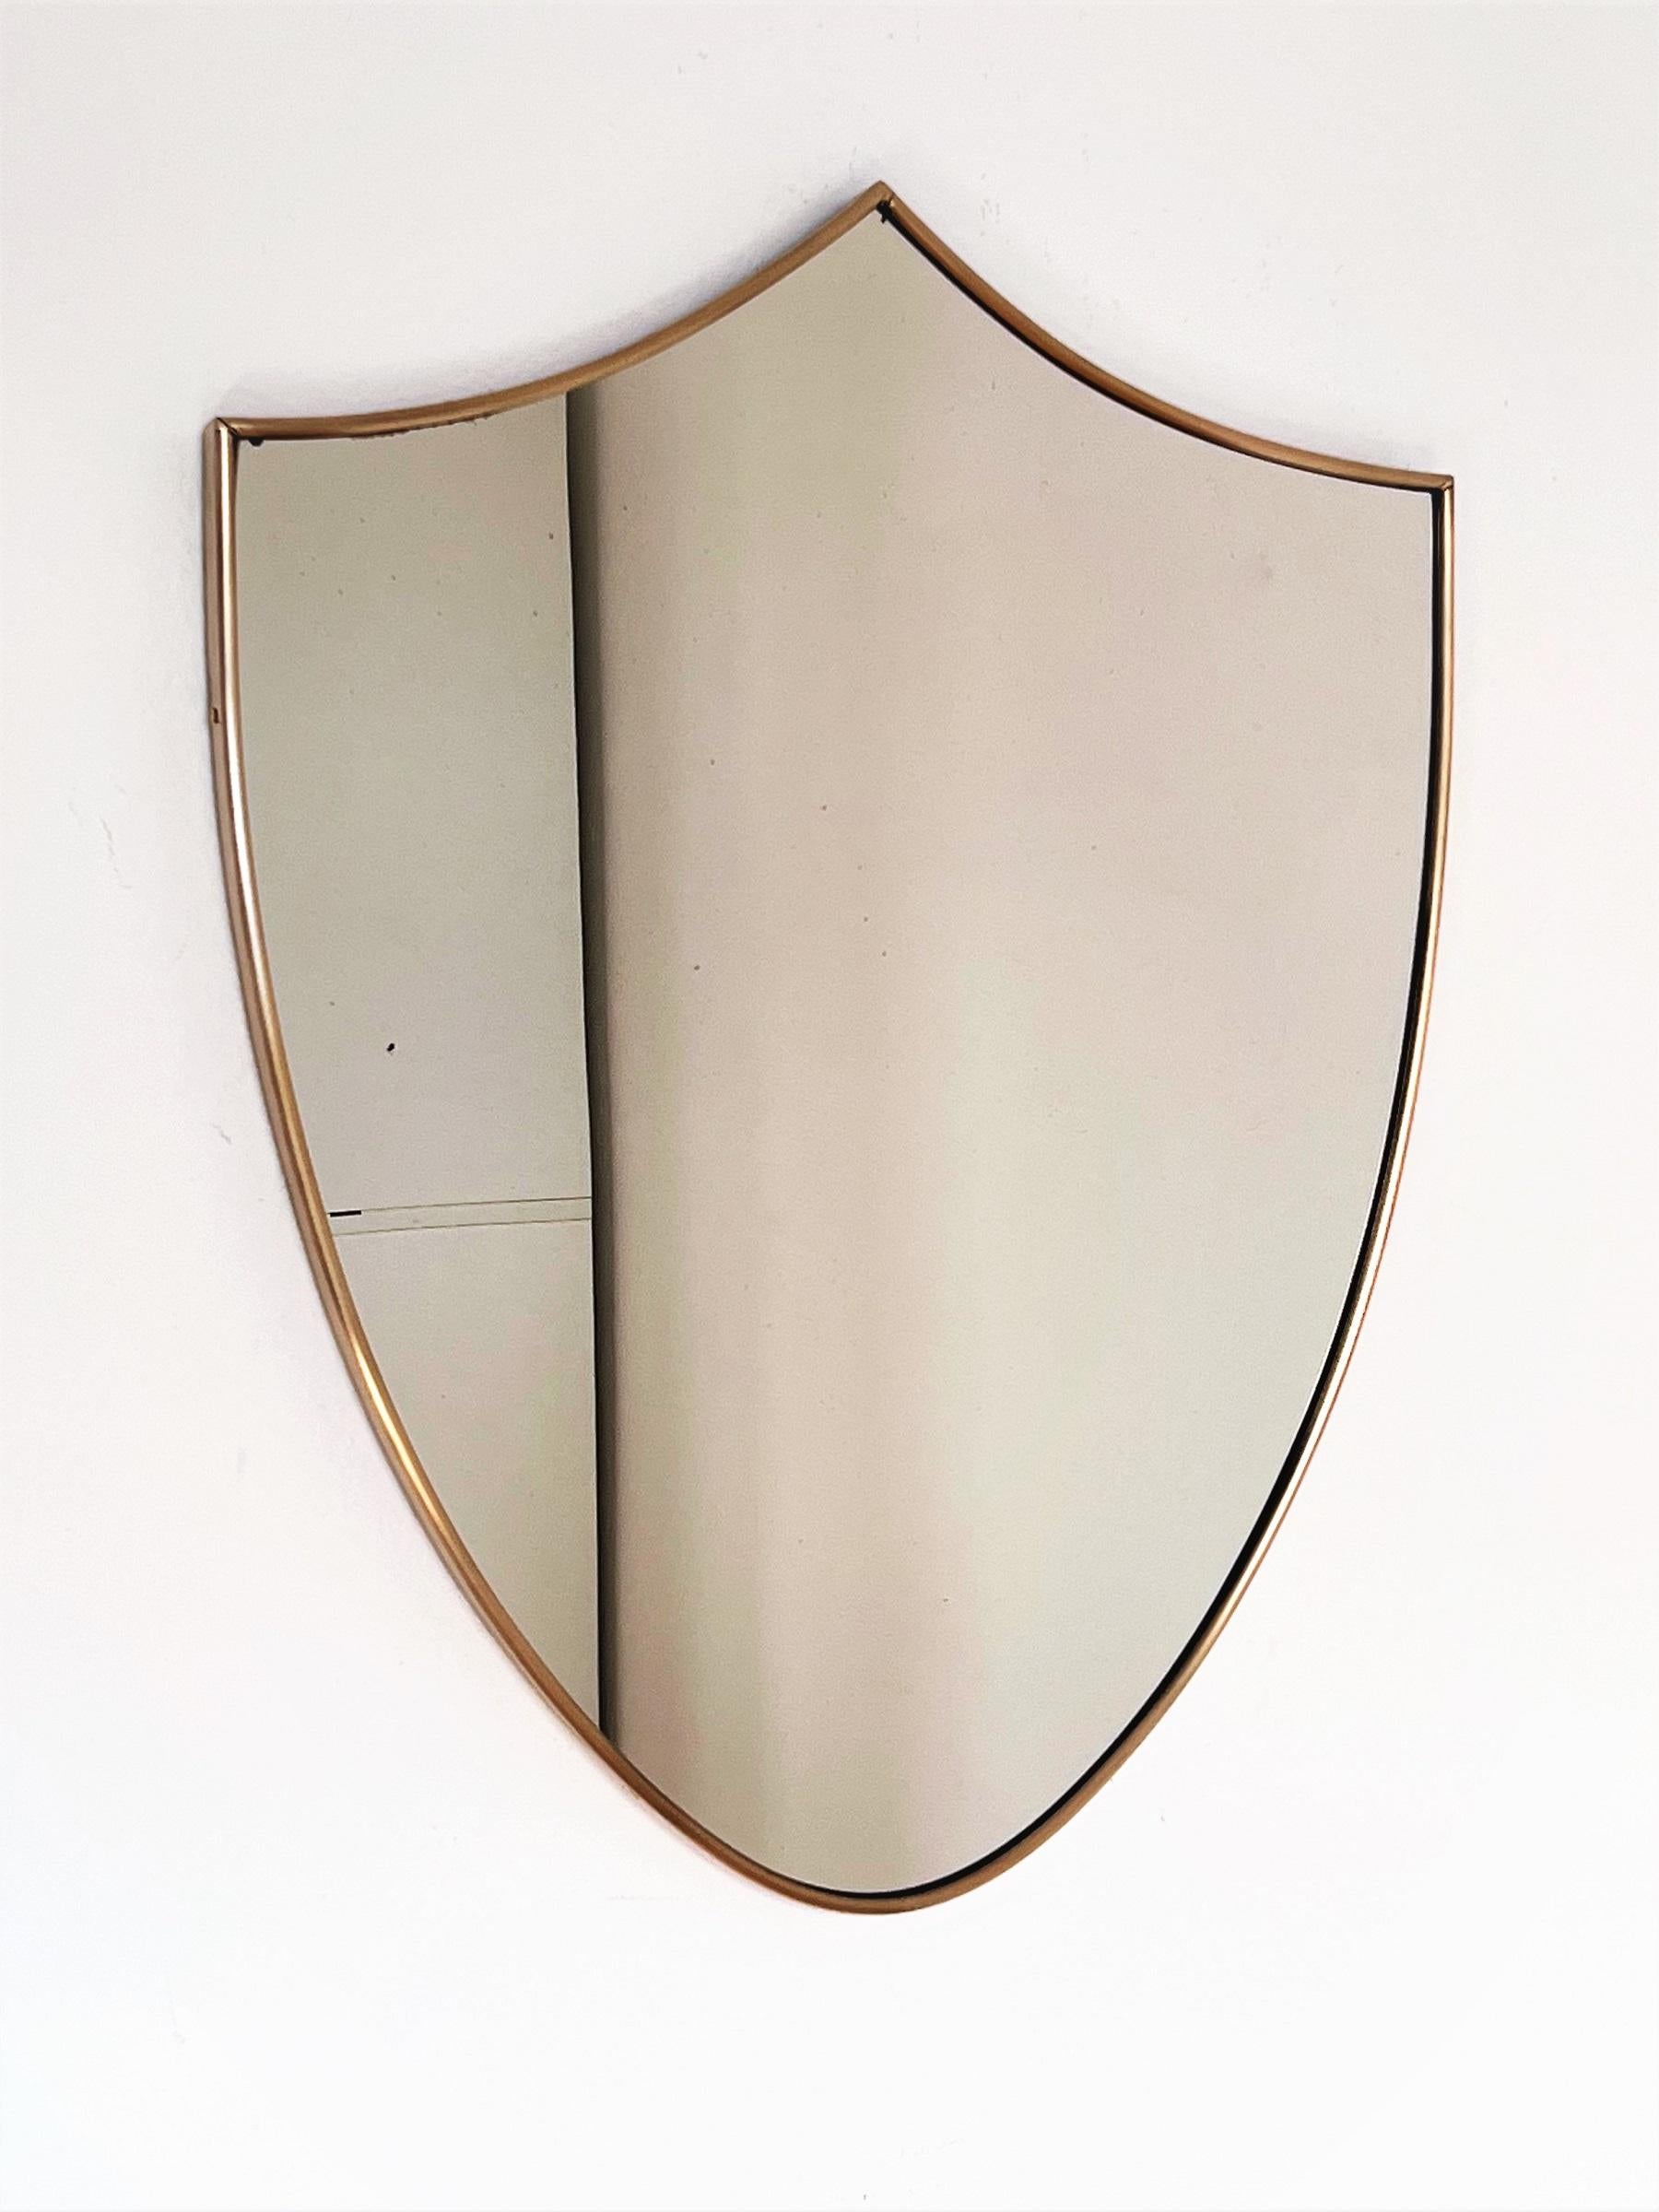 Elegant mid-century mirror with shiny brass frame and pointed shape for real vintage lovers.
Made in Italy in the 1960s approximately.
The brass have been polished and is shiny, in good condition and small normal vintage signs.
The mirror glass is